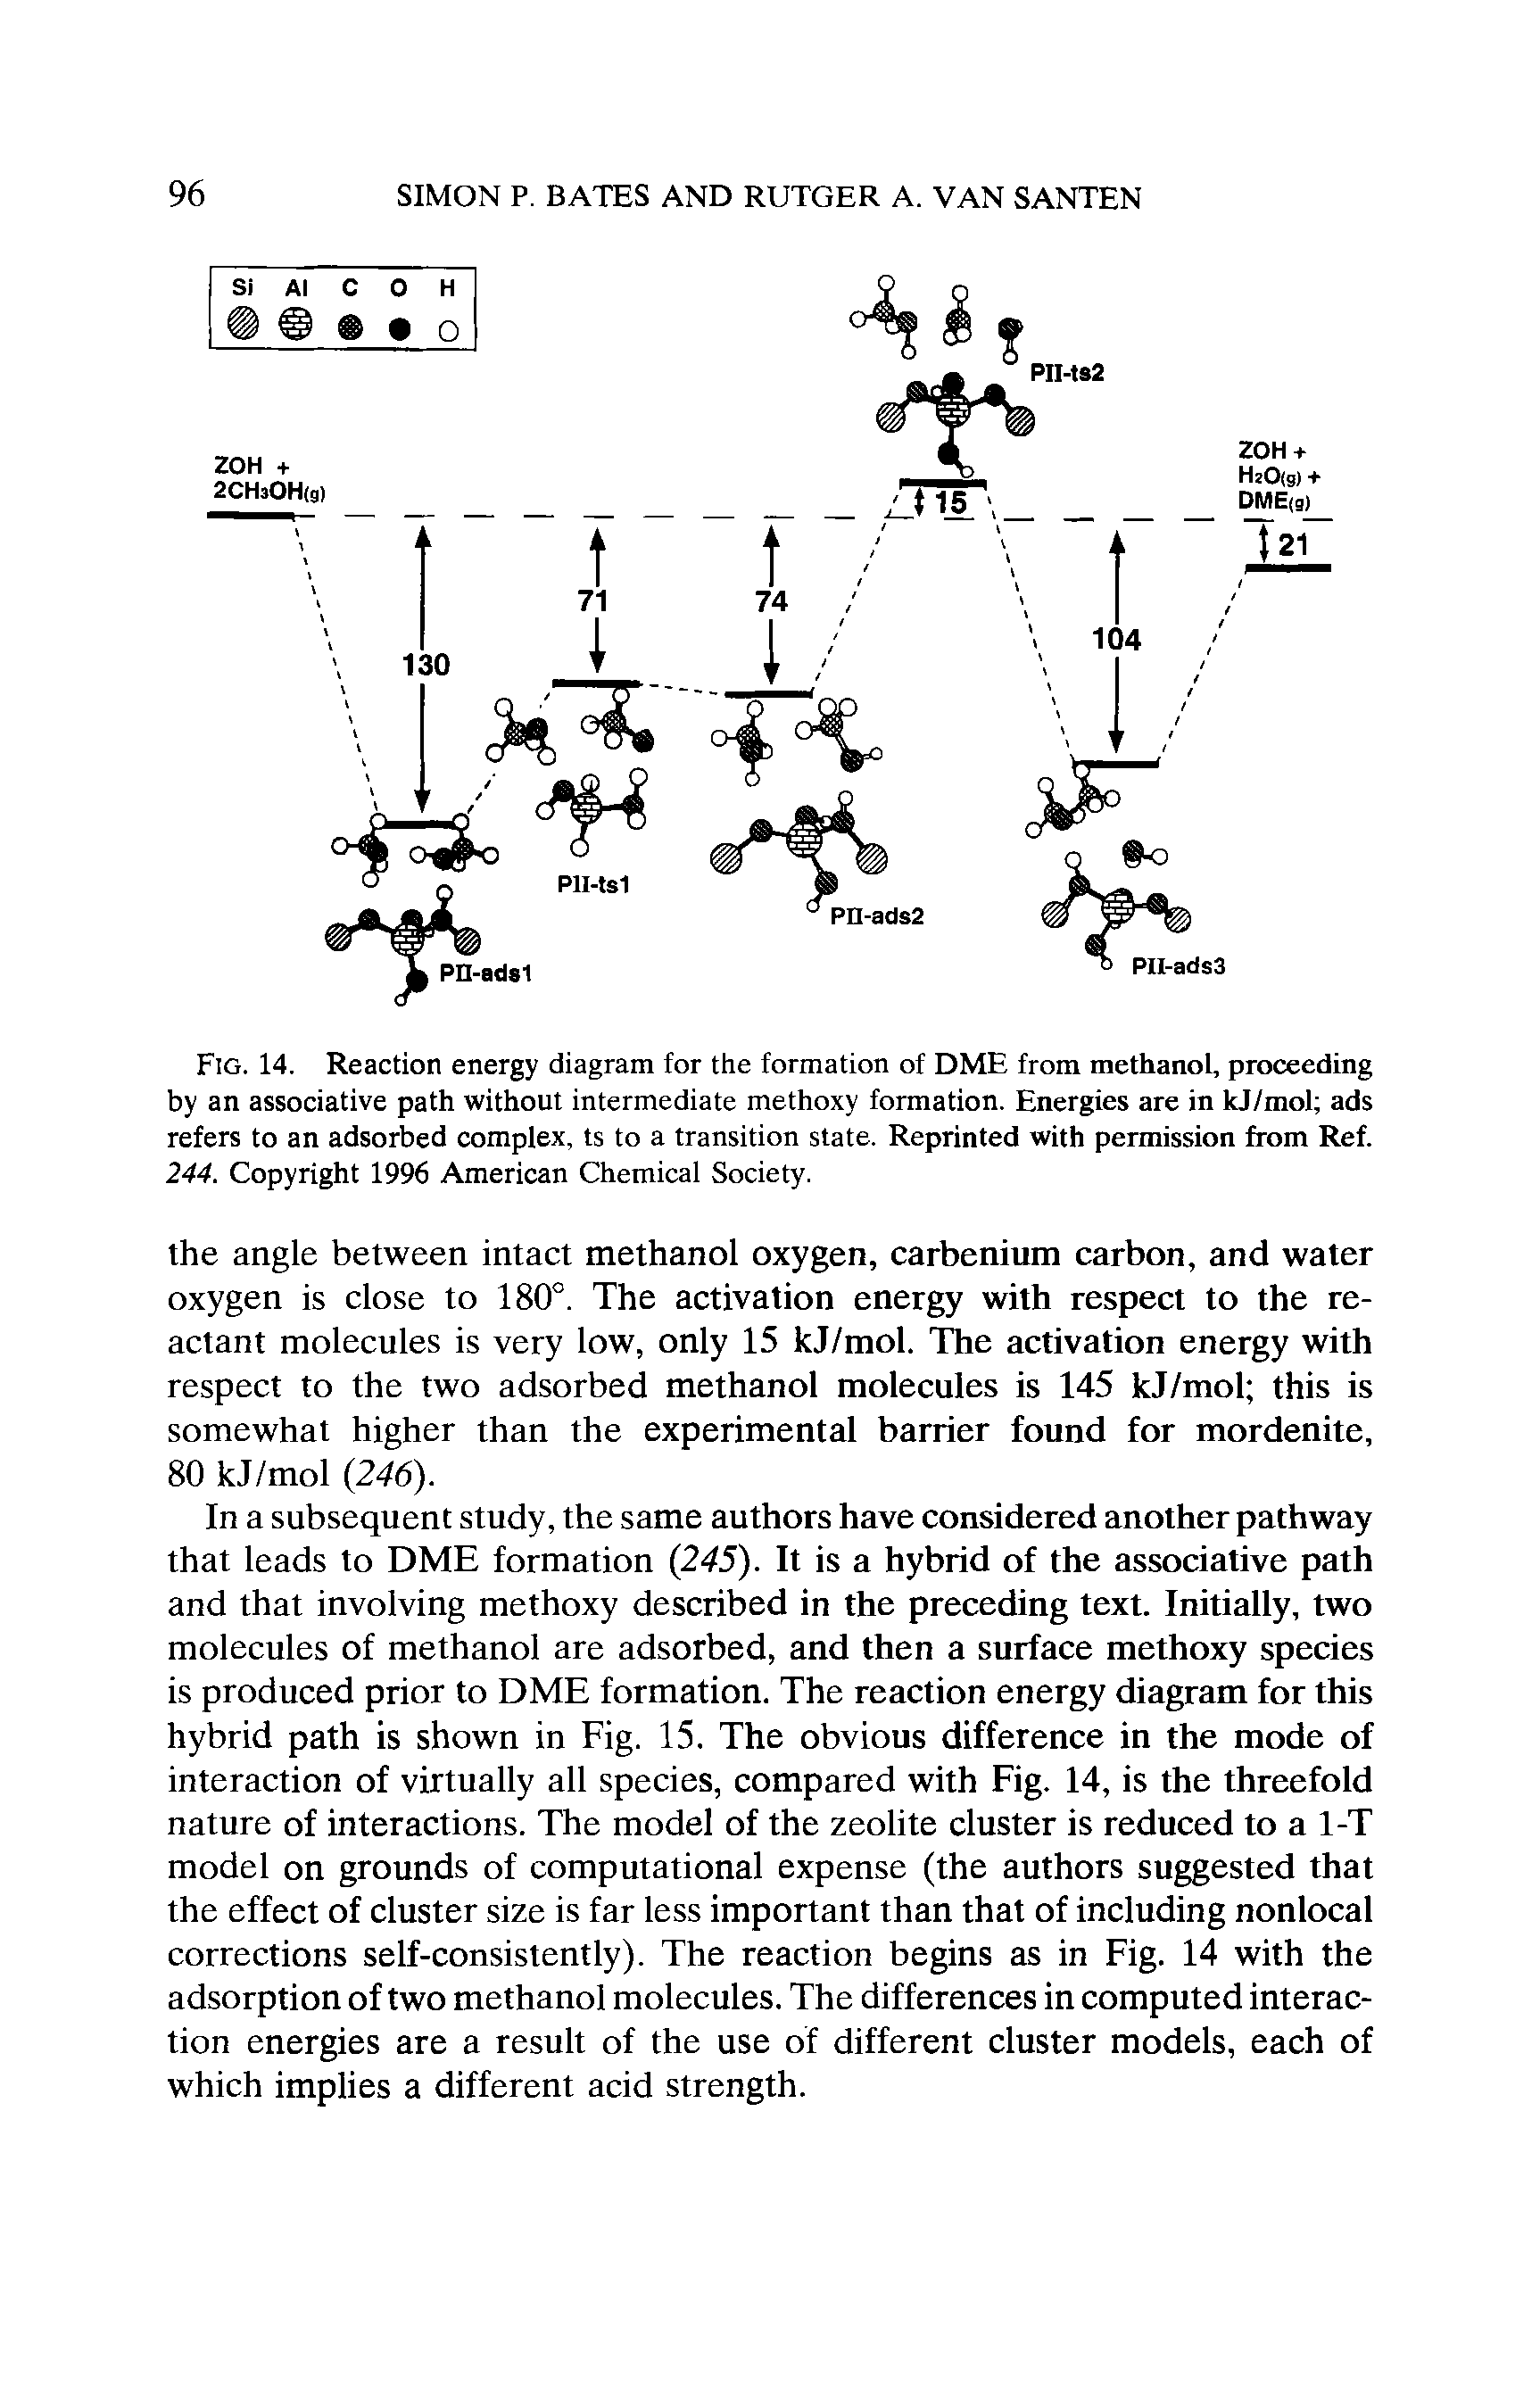 Fig. 14. Reaction energy diagram for the formation of DME from methanol, proceeding by an associative path without intermediate methoxy formation. Energies are in kj/mol ads refers to an adsorbed complex, ts to a transition state. Reprinted with permission from Ref. 244. Copyright 1996 American Chemical Society.